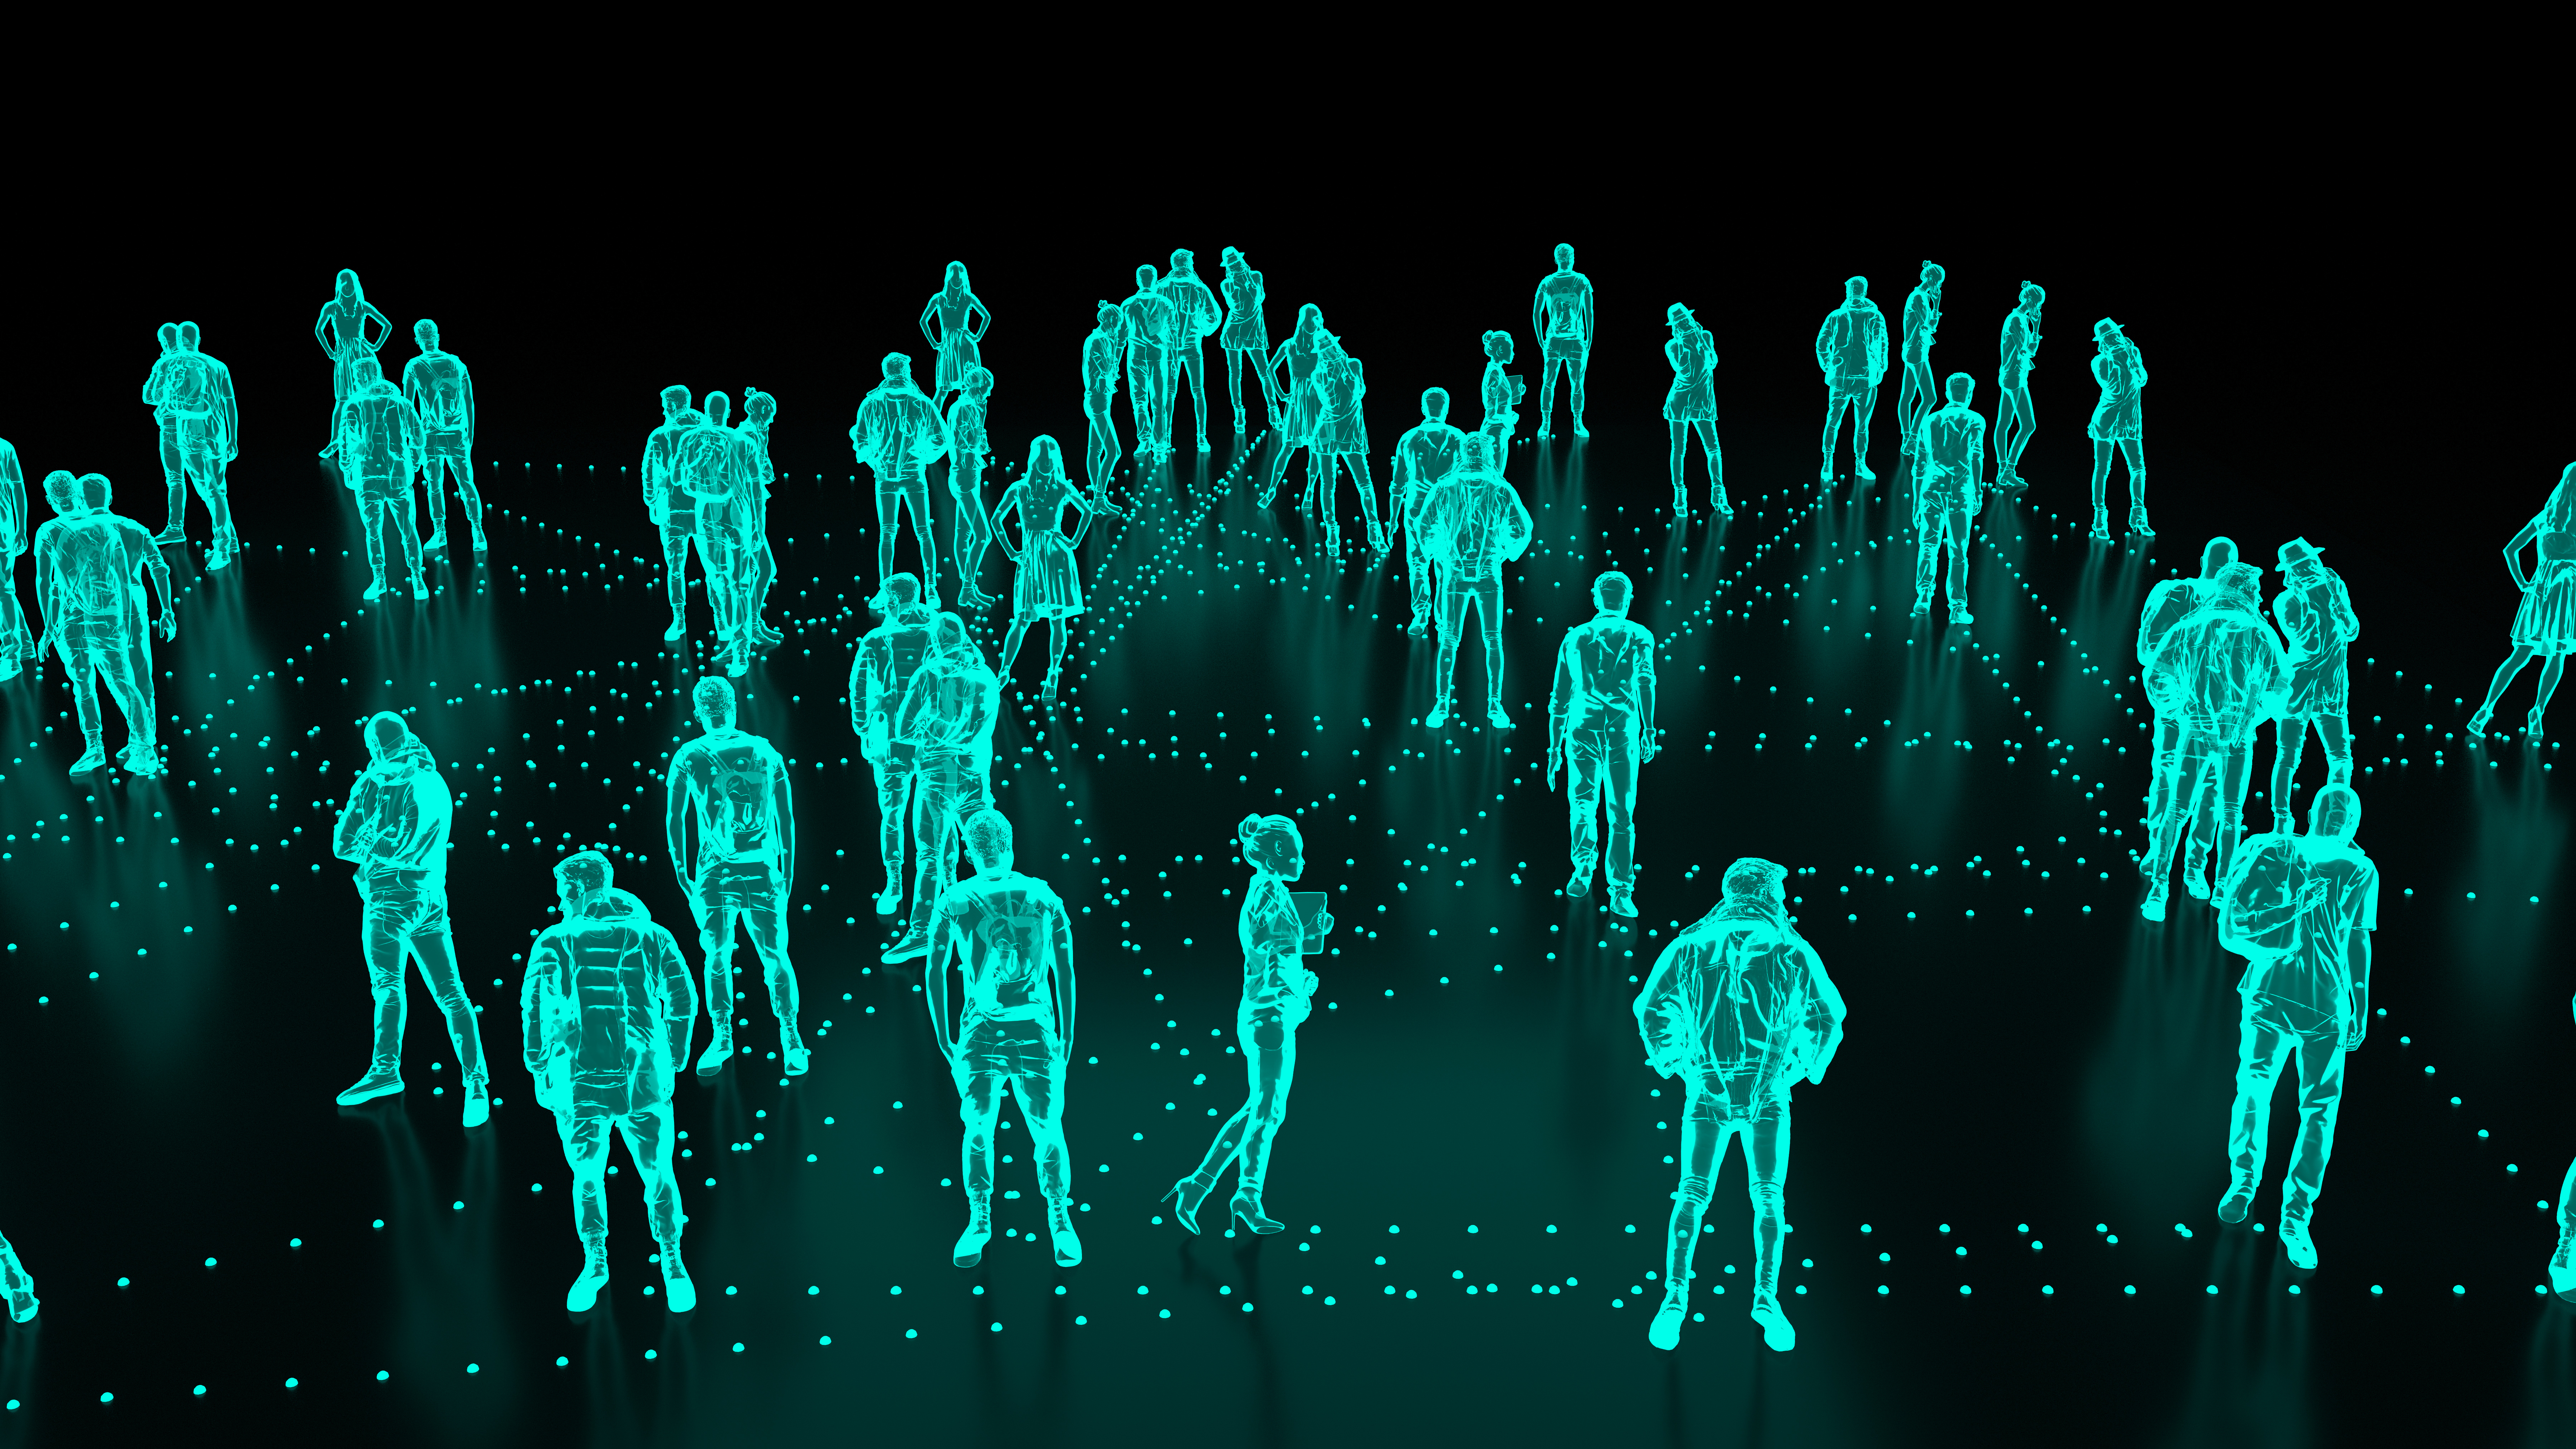 holograms of a group of people